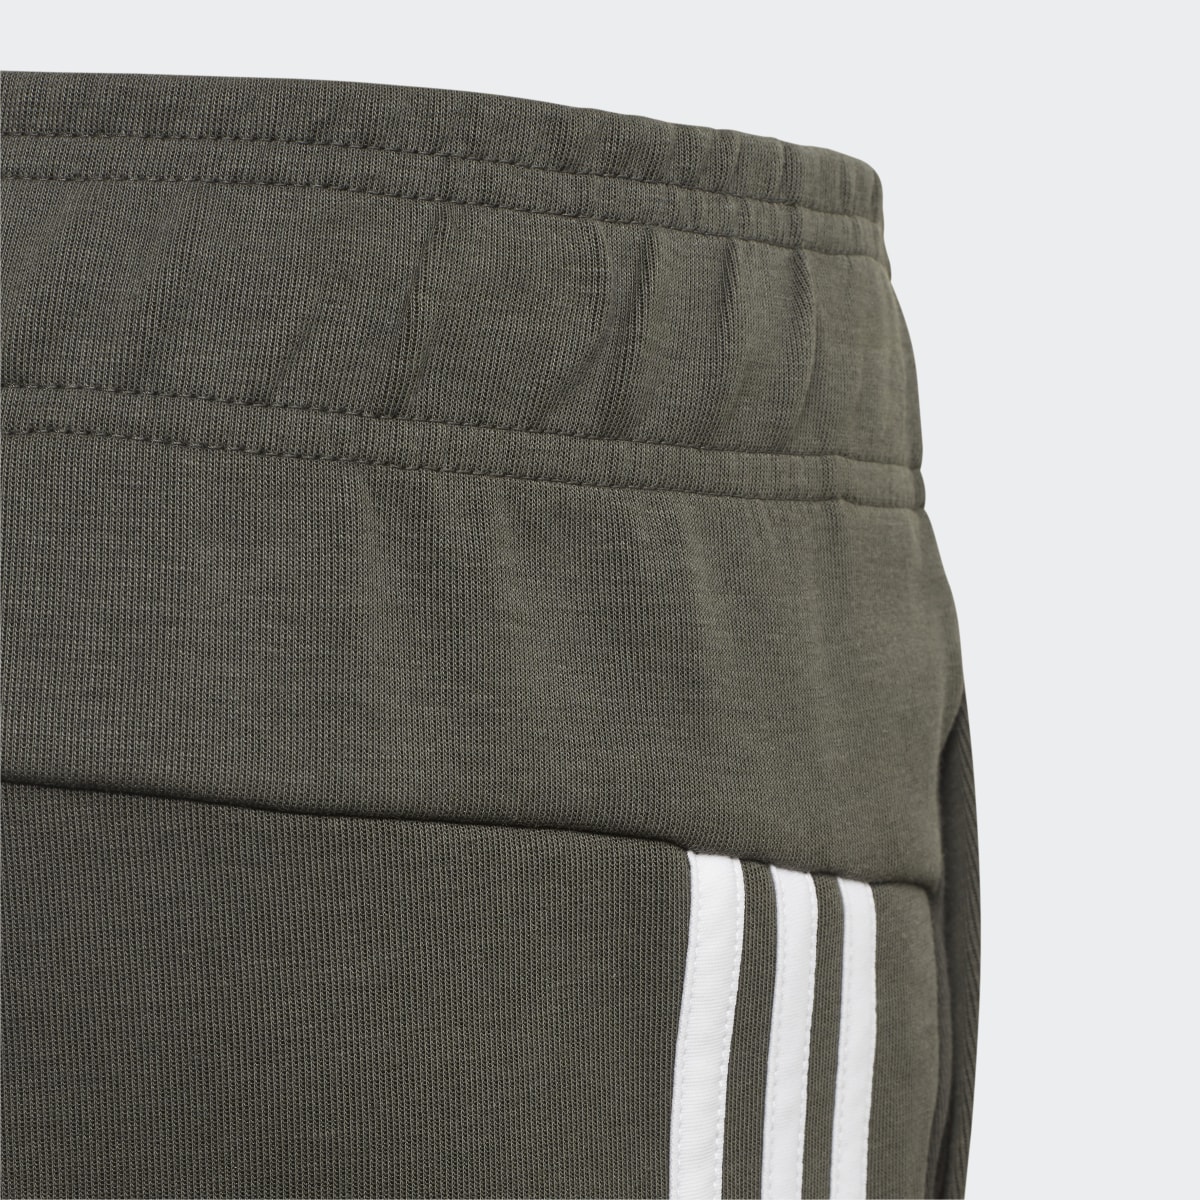 Adidas Must Haves 3-Stripes Pants. 5